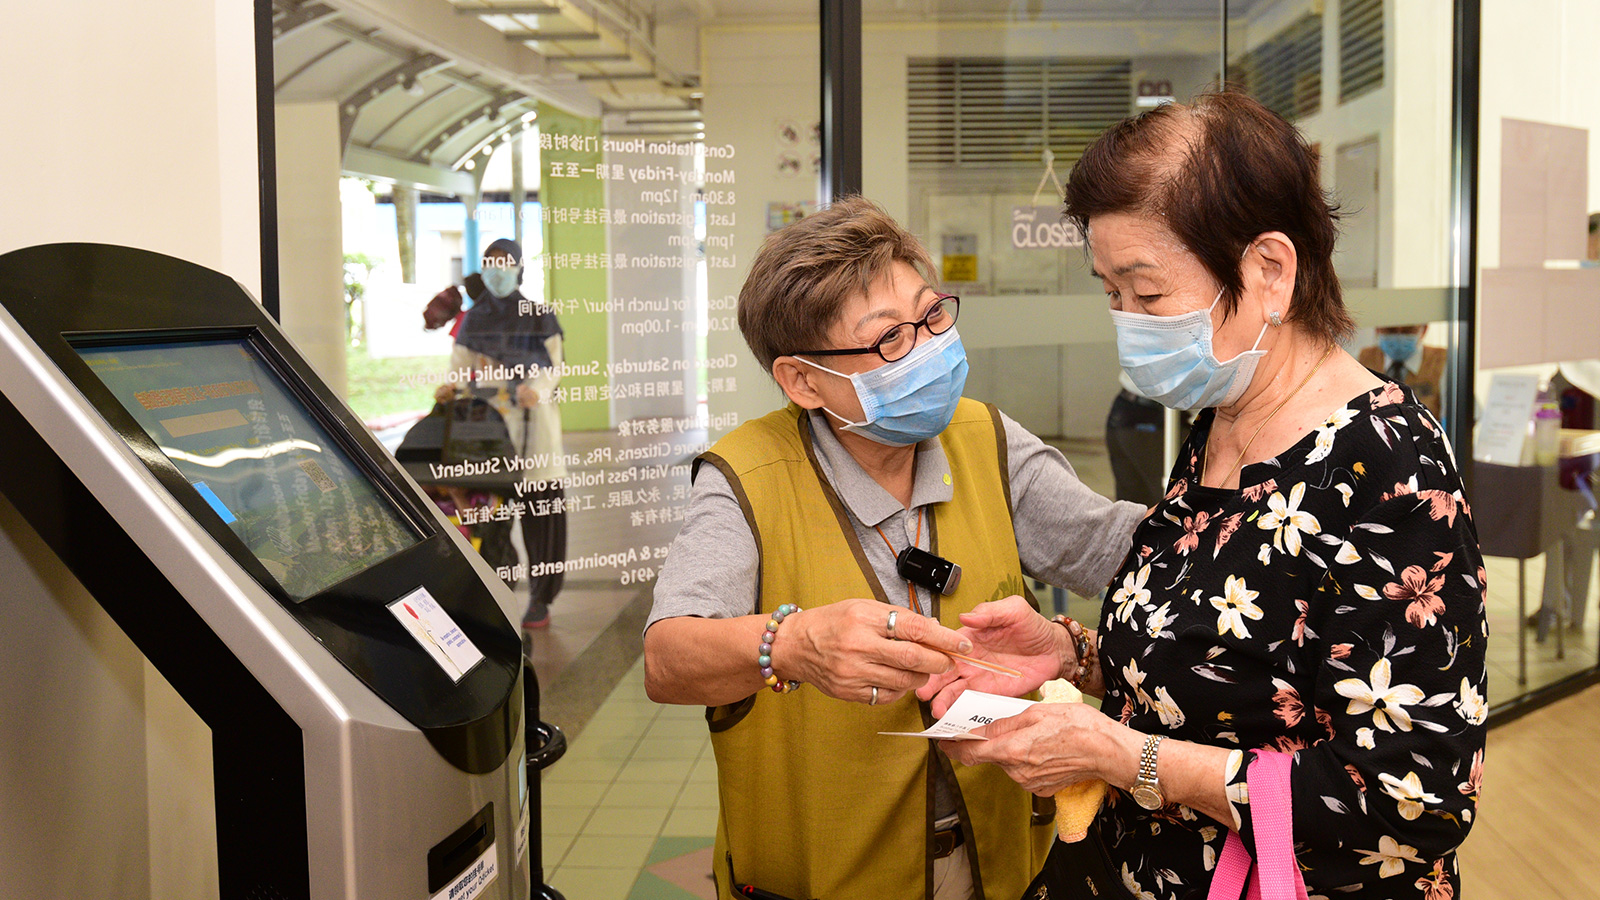 A face mask can never shield the joy of volunteers who happily serve at the Tzu Chi TCM free clinic in Khatib.